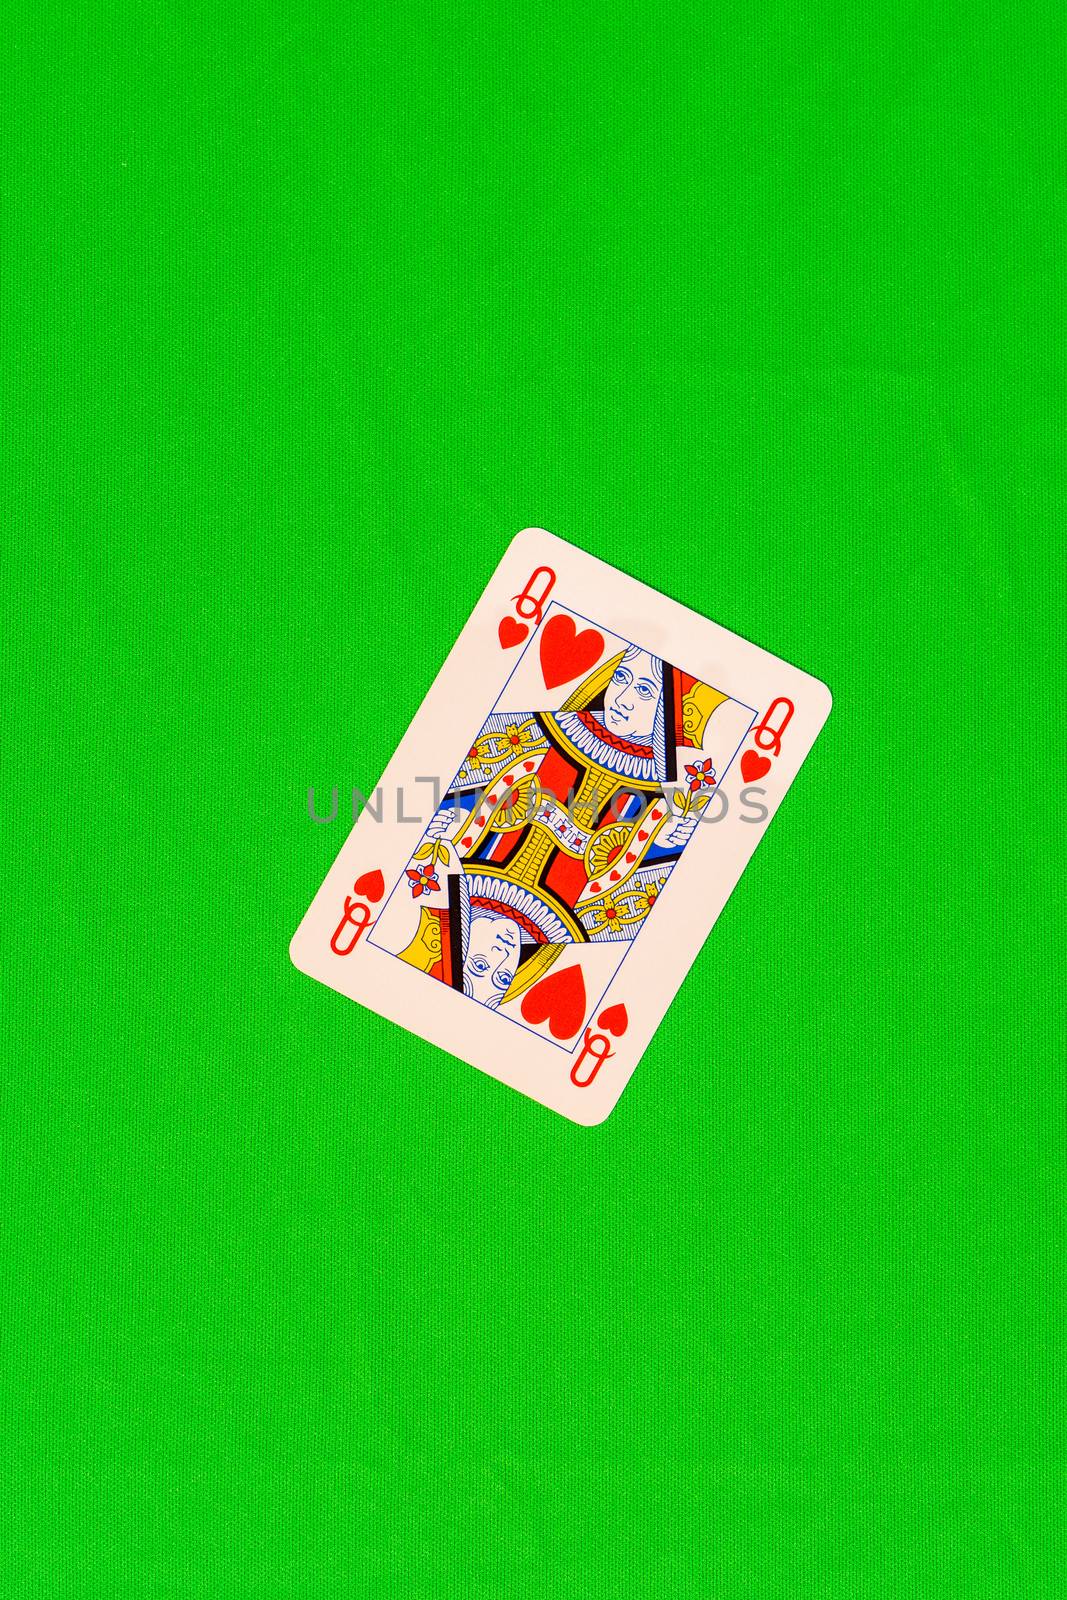 Playing card depicting the queen of hearts, poker card on colored background